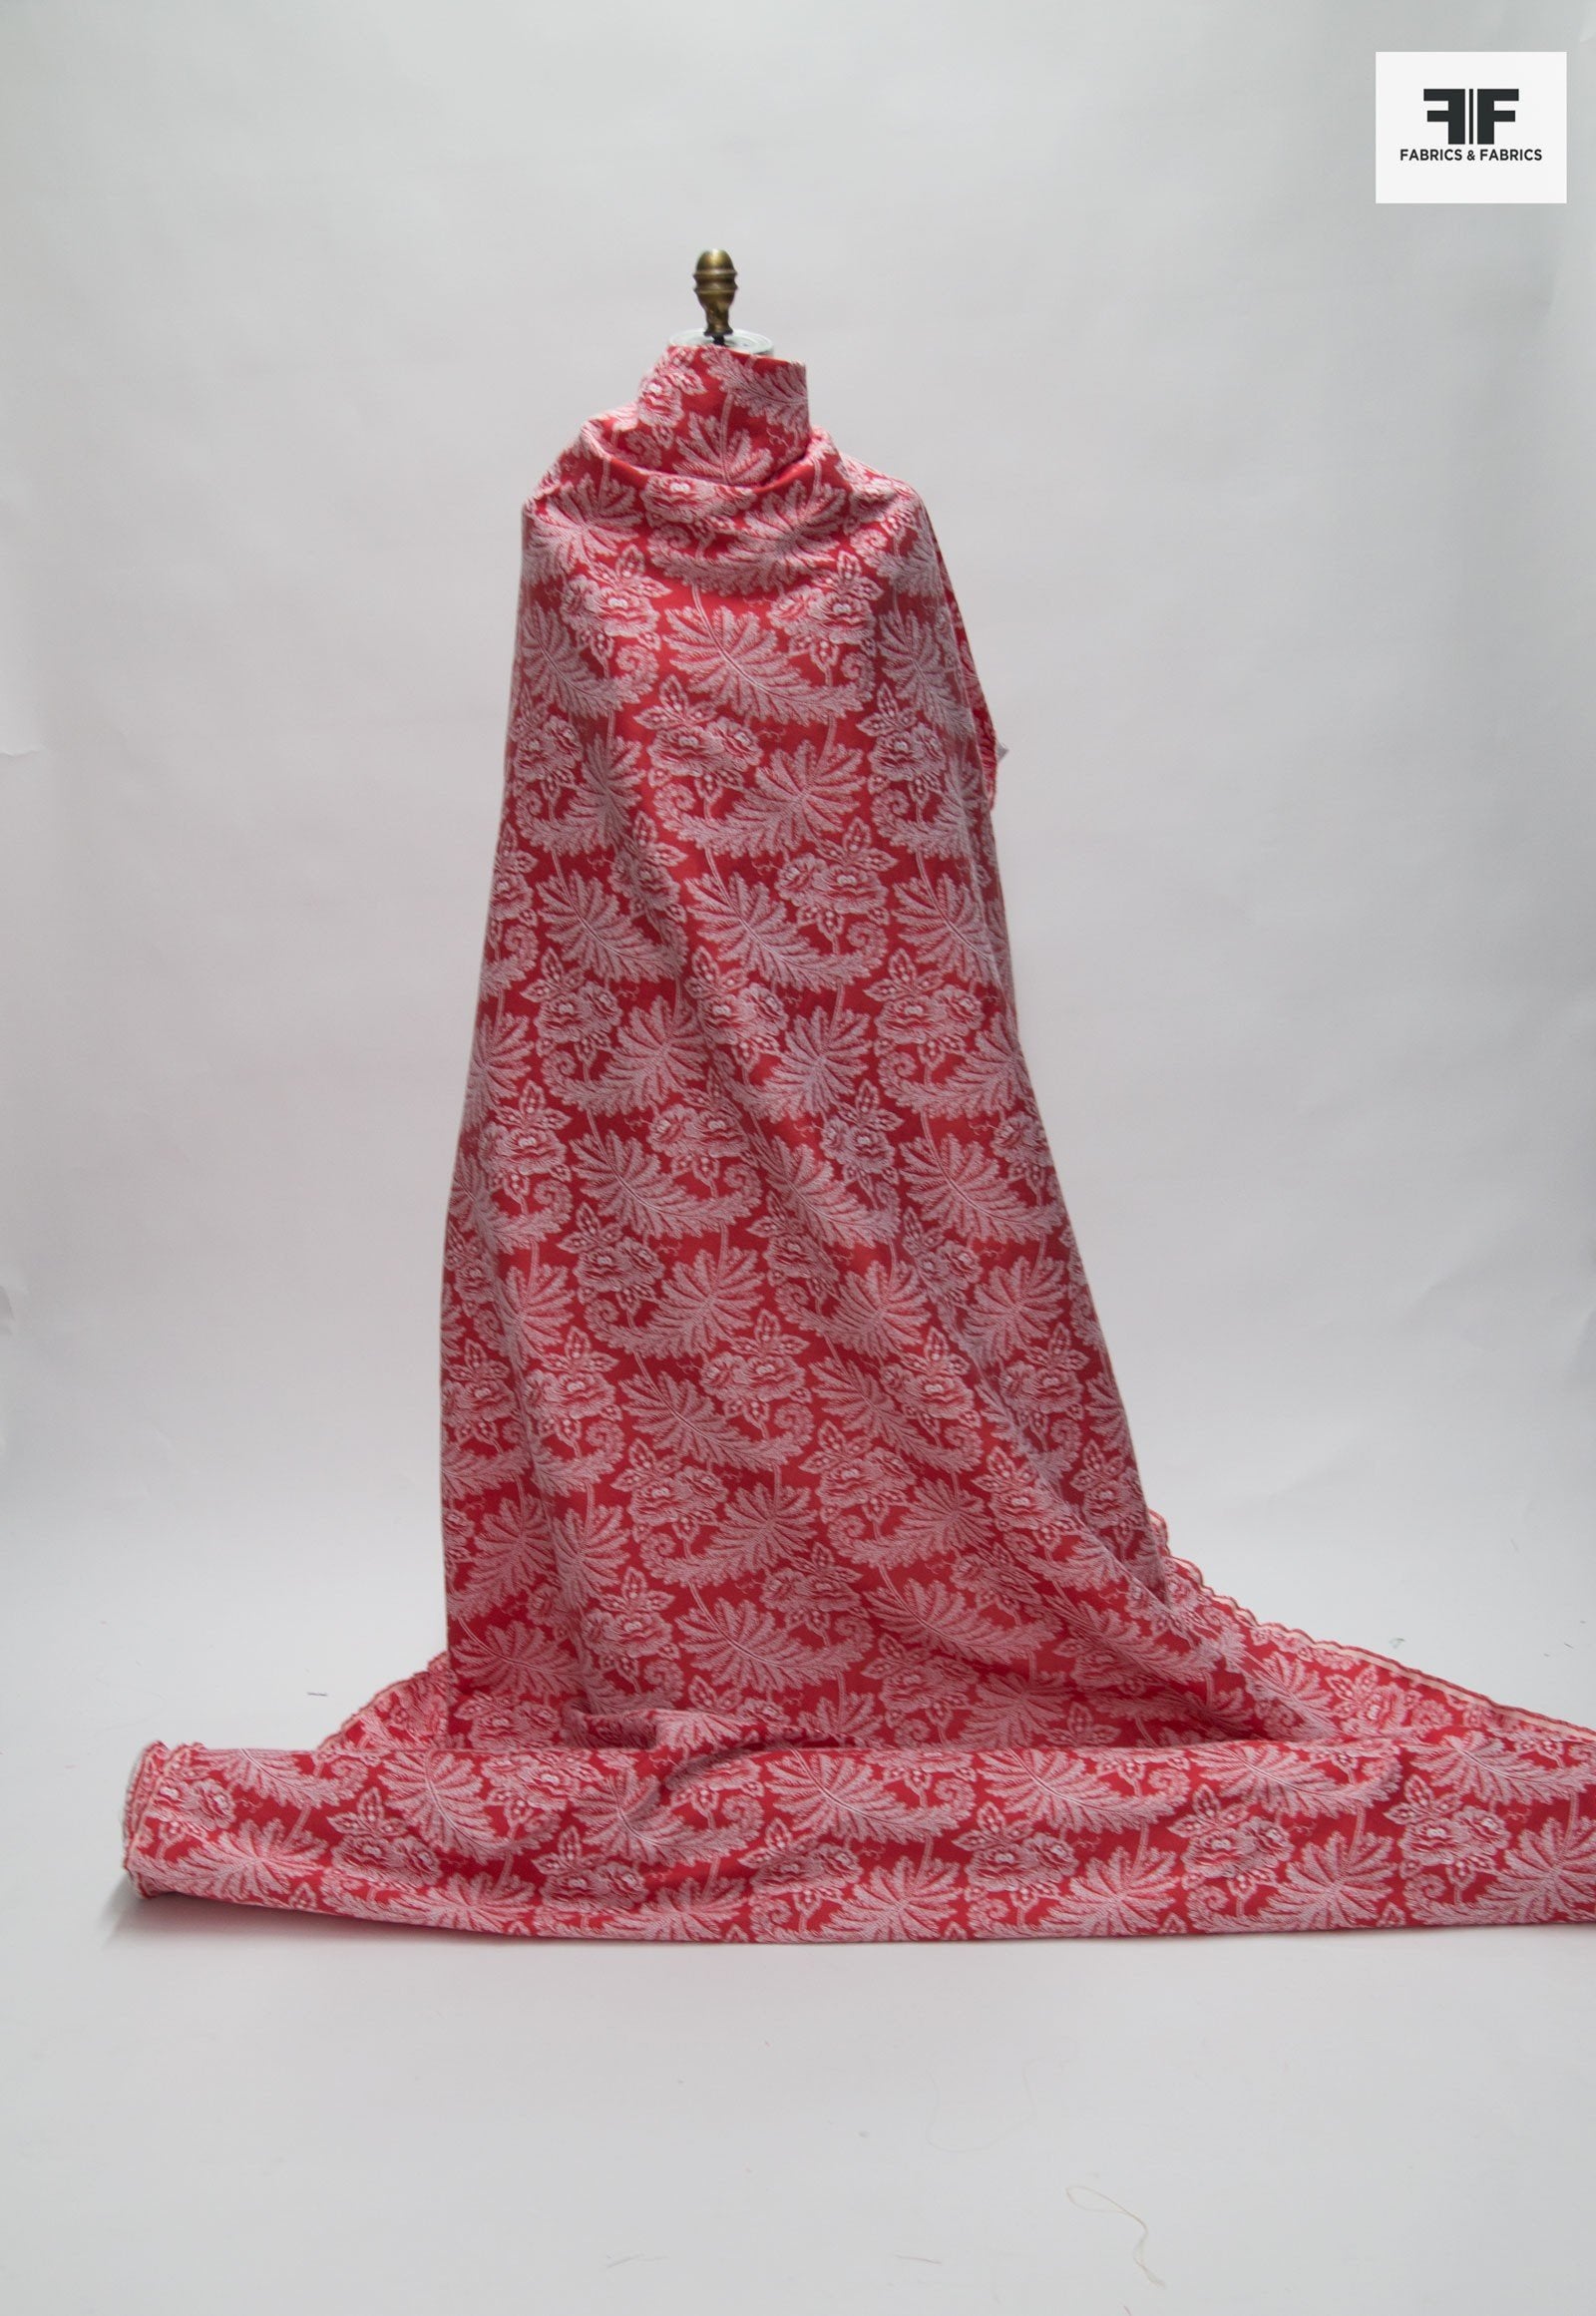 Woven Leaf Brocade - Red/White